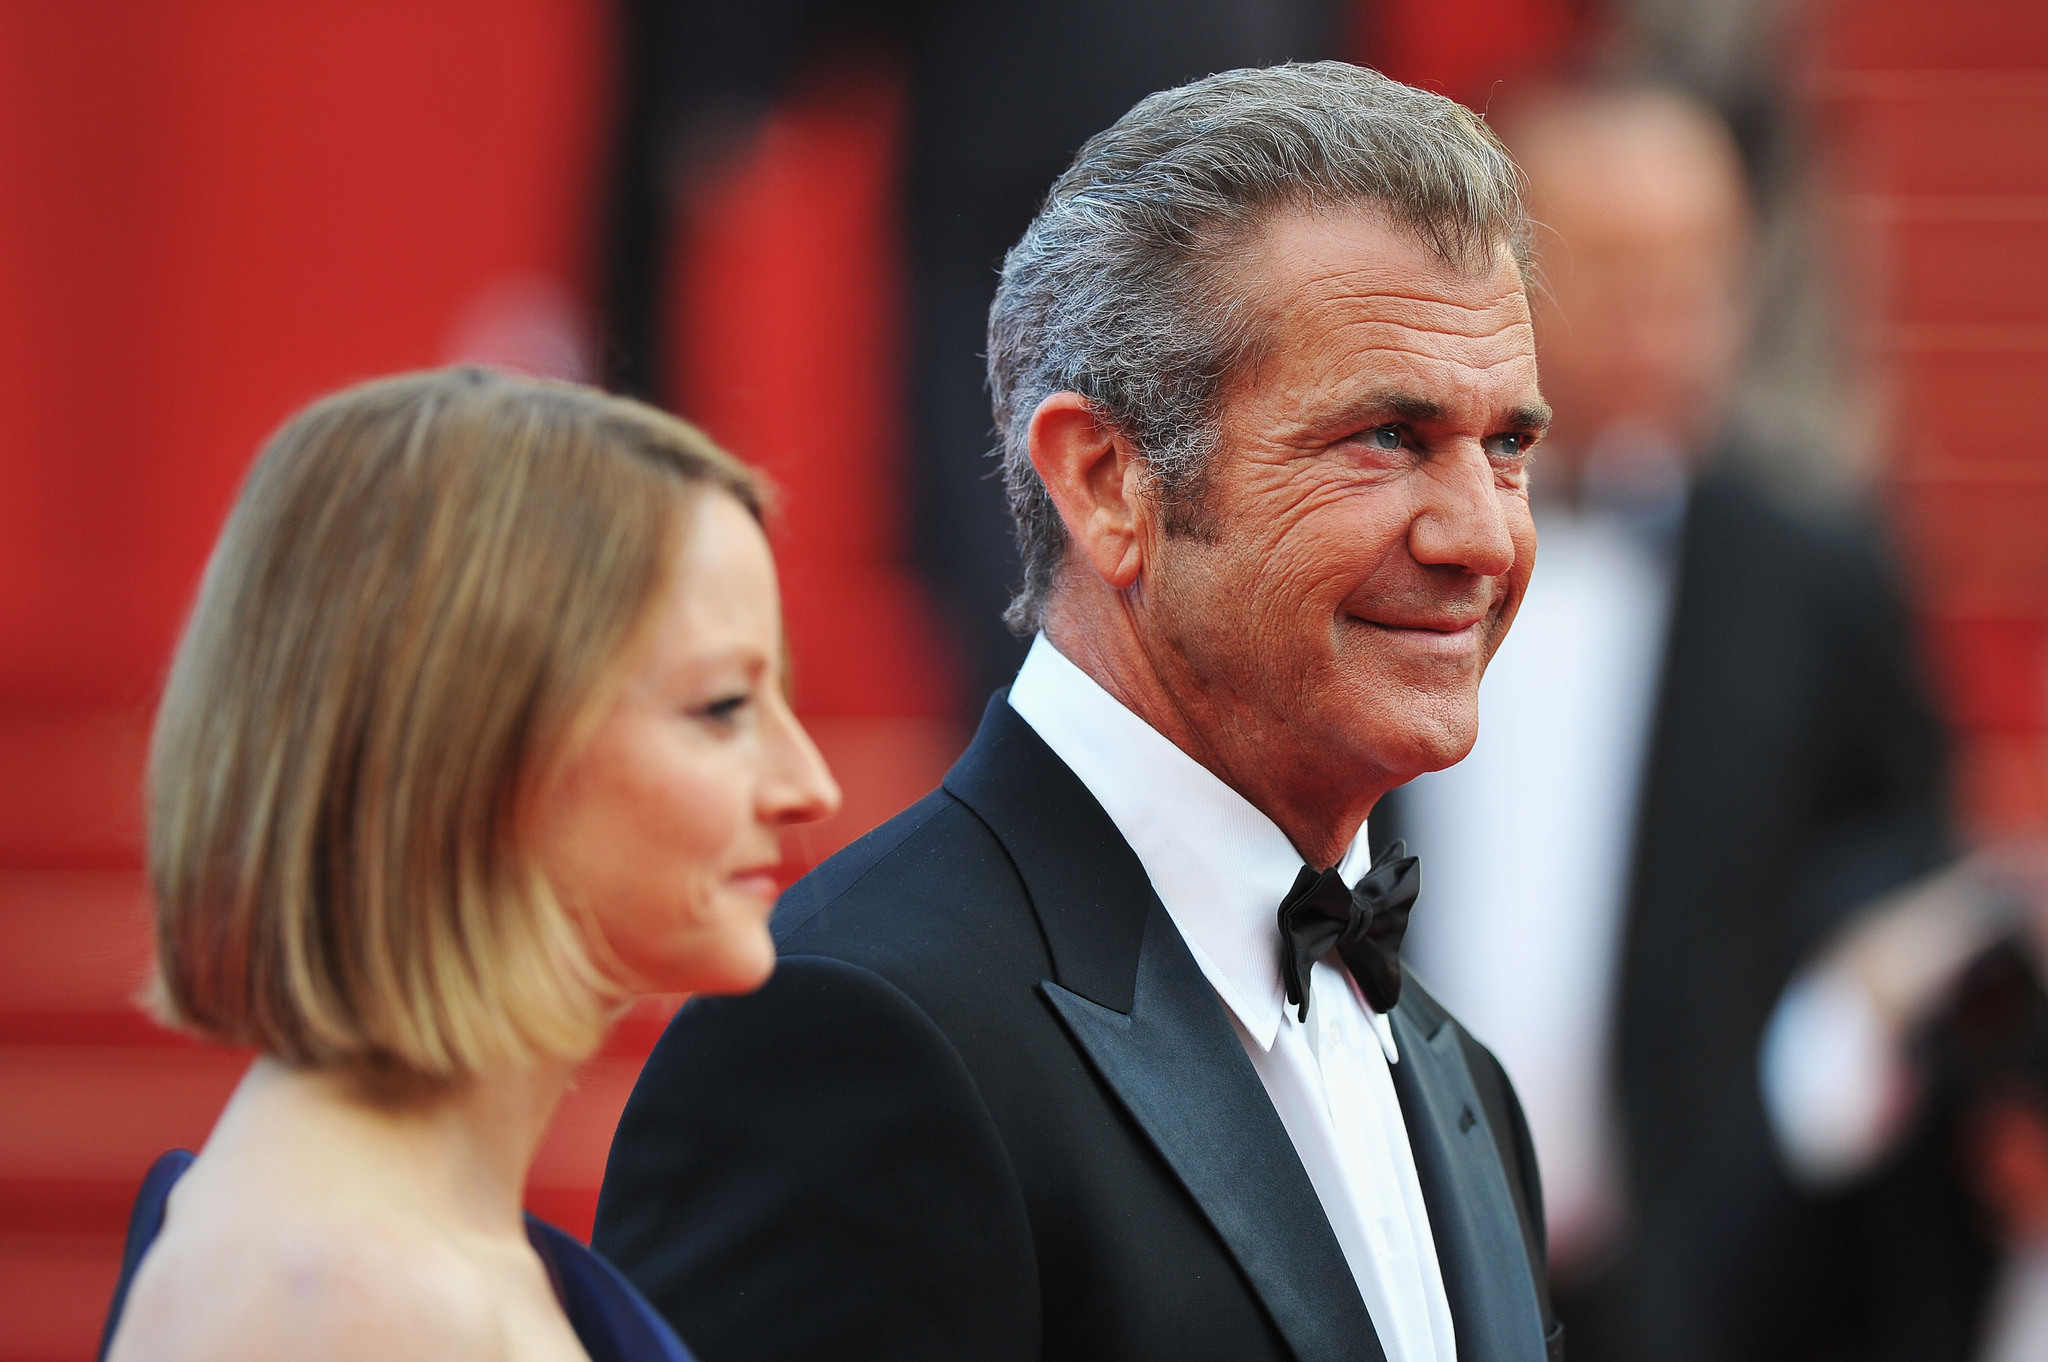 Jodie Foster and Mel Gibson